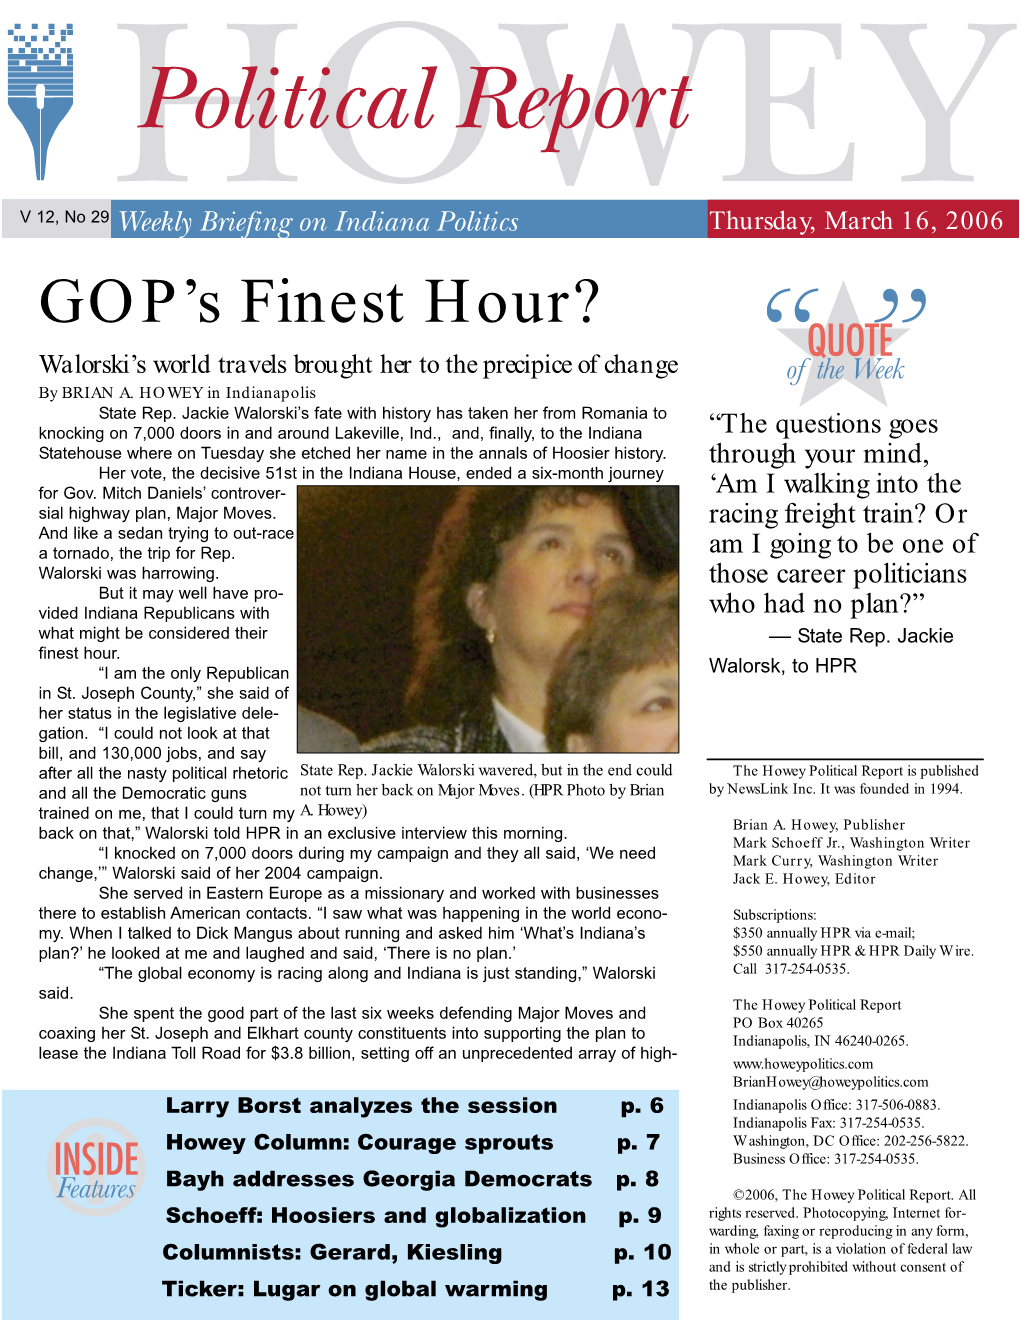 GOP's Finest Hour?